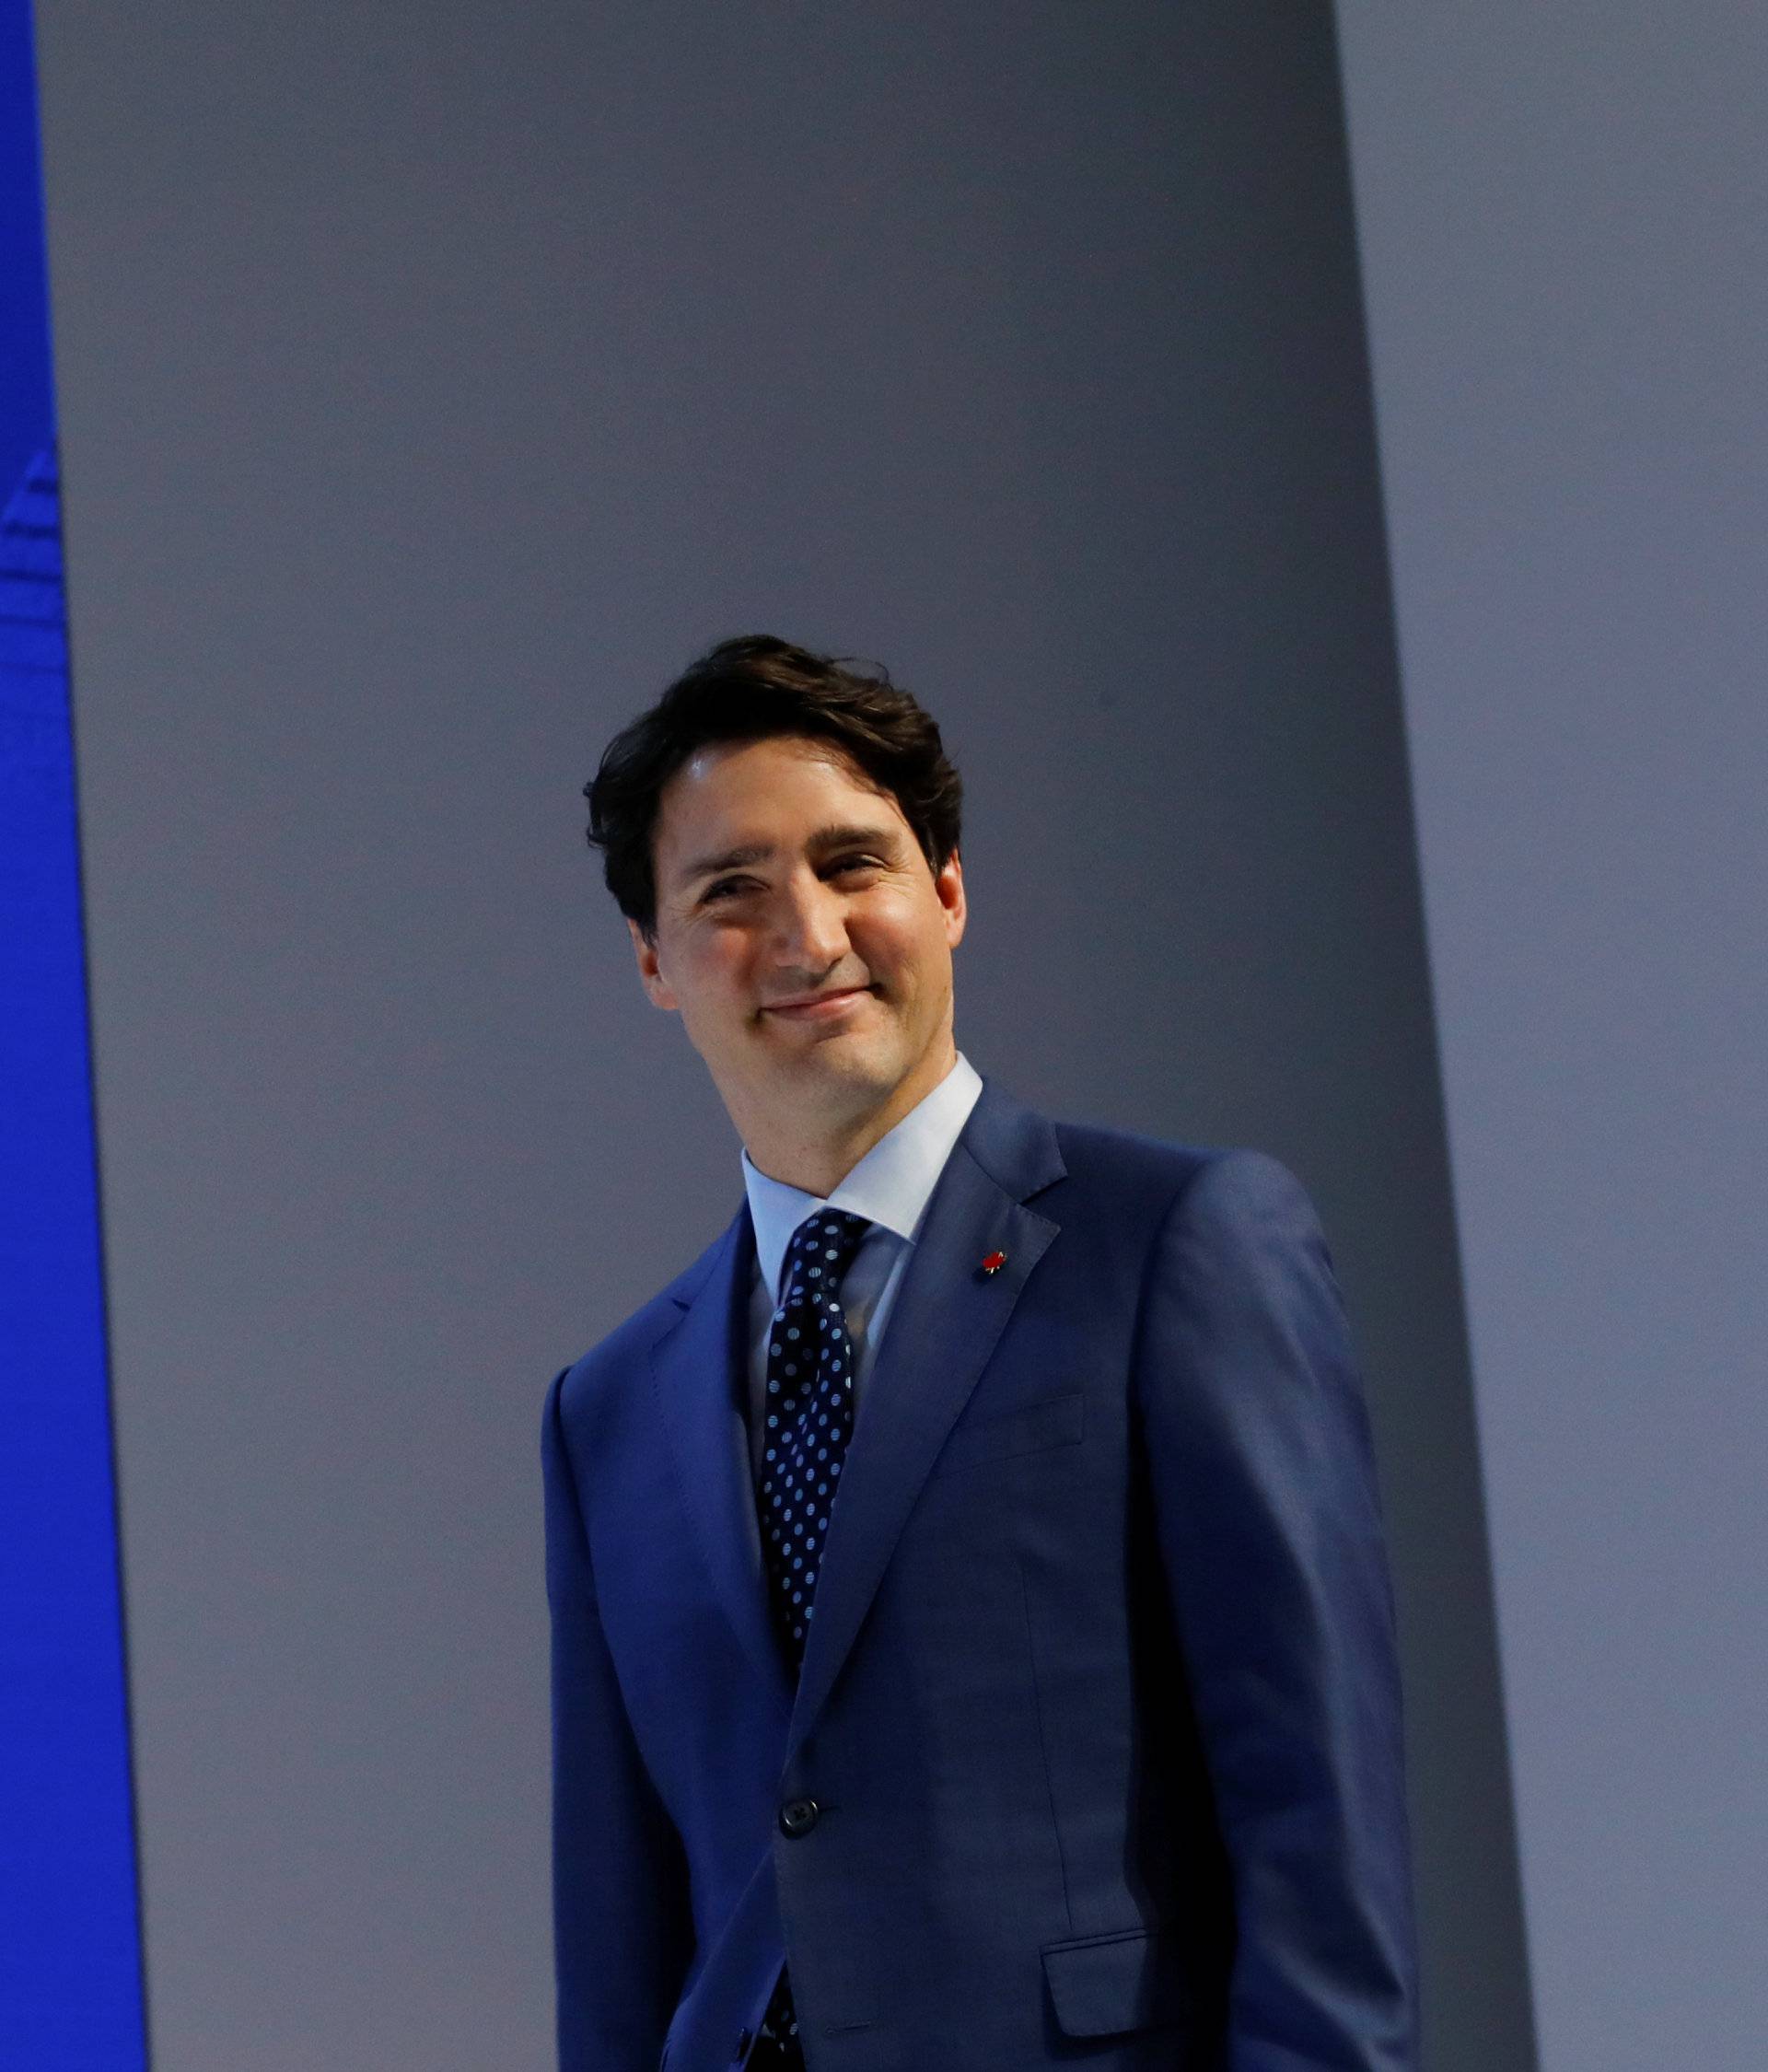 Canada's Prime Minister Justin Trudeau attends the World Economic Forum (WEF) annual meeting in Davos